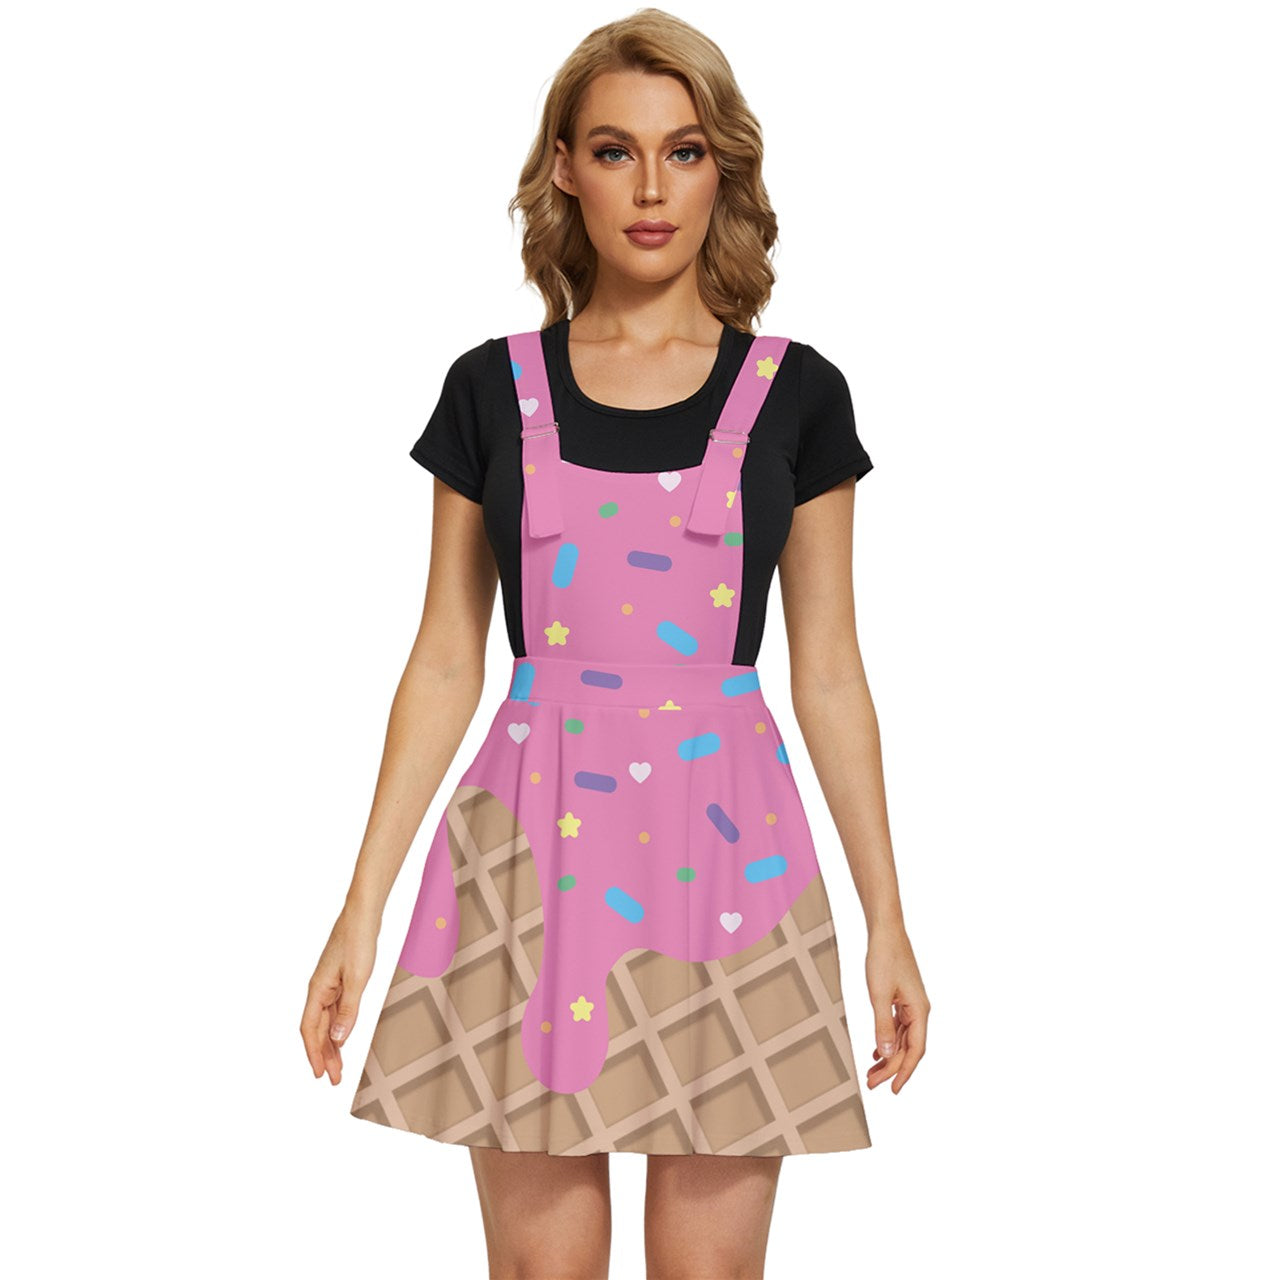 Buy BookMyCostume Ice Cream Cold Sweet Food Kids Fancy Dress Costume 6-7  years Online at Lowest Price Ever in India | Check Reviews & Ratings - Shop  The World